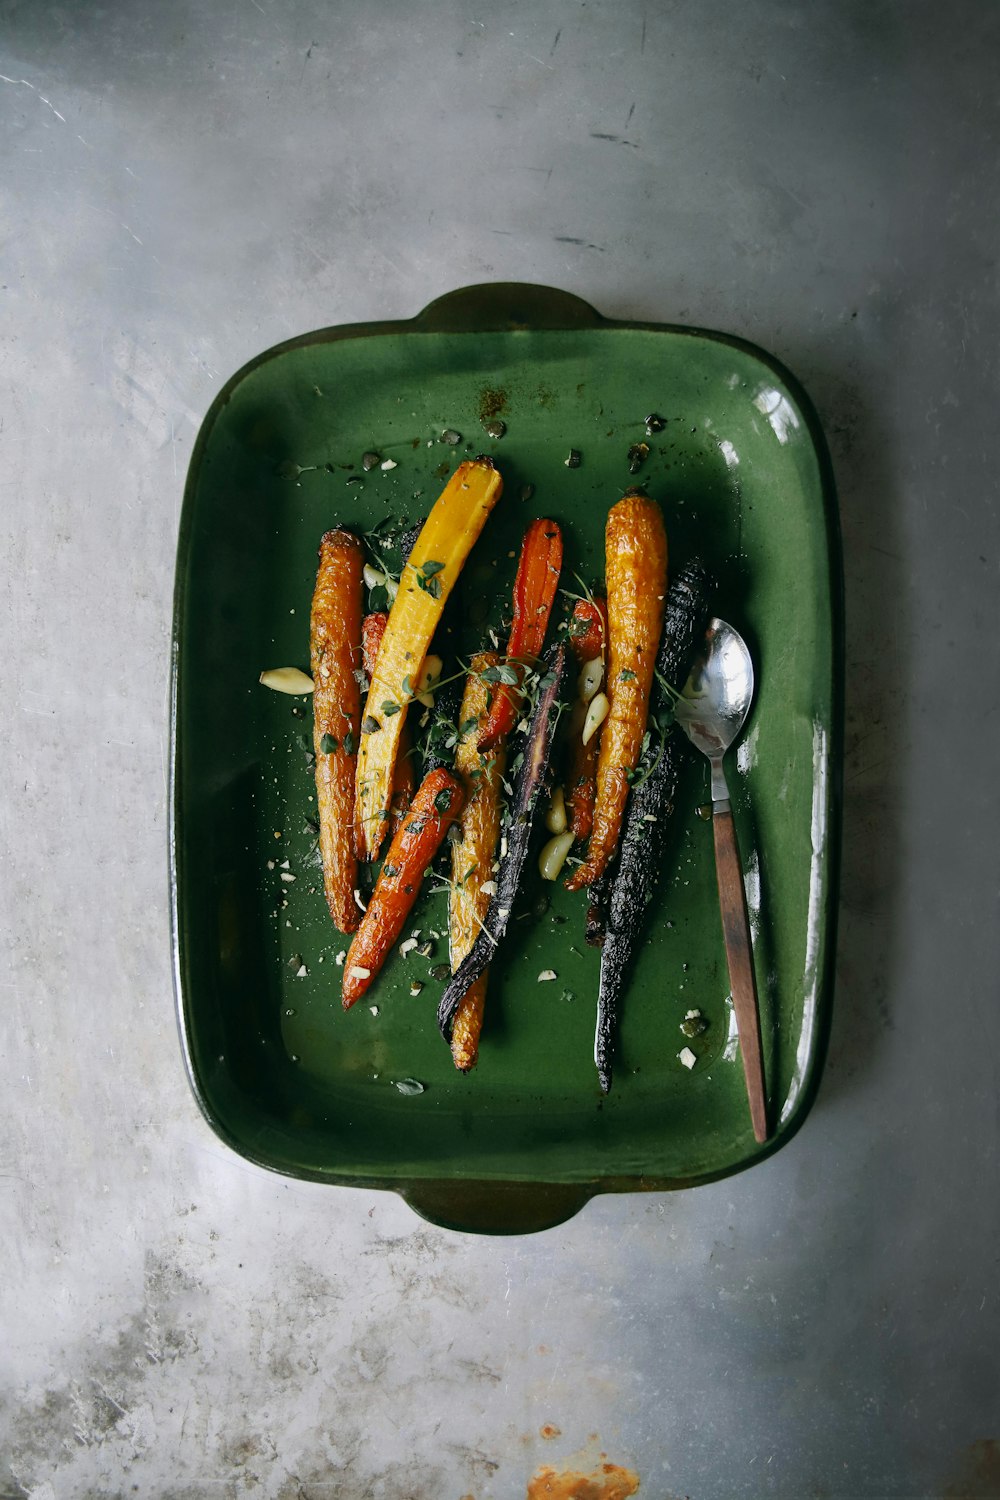 a green plate topped with carrots and other vegetables